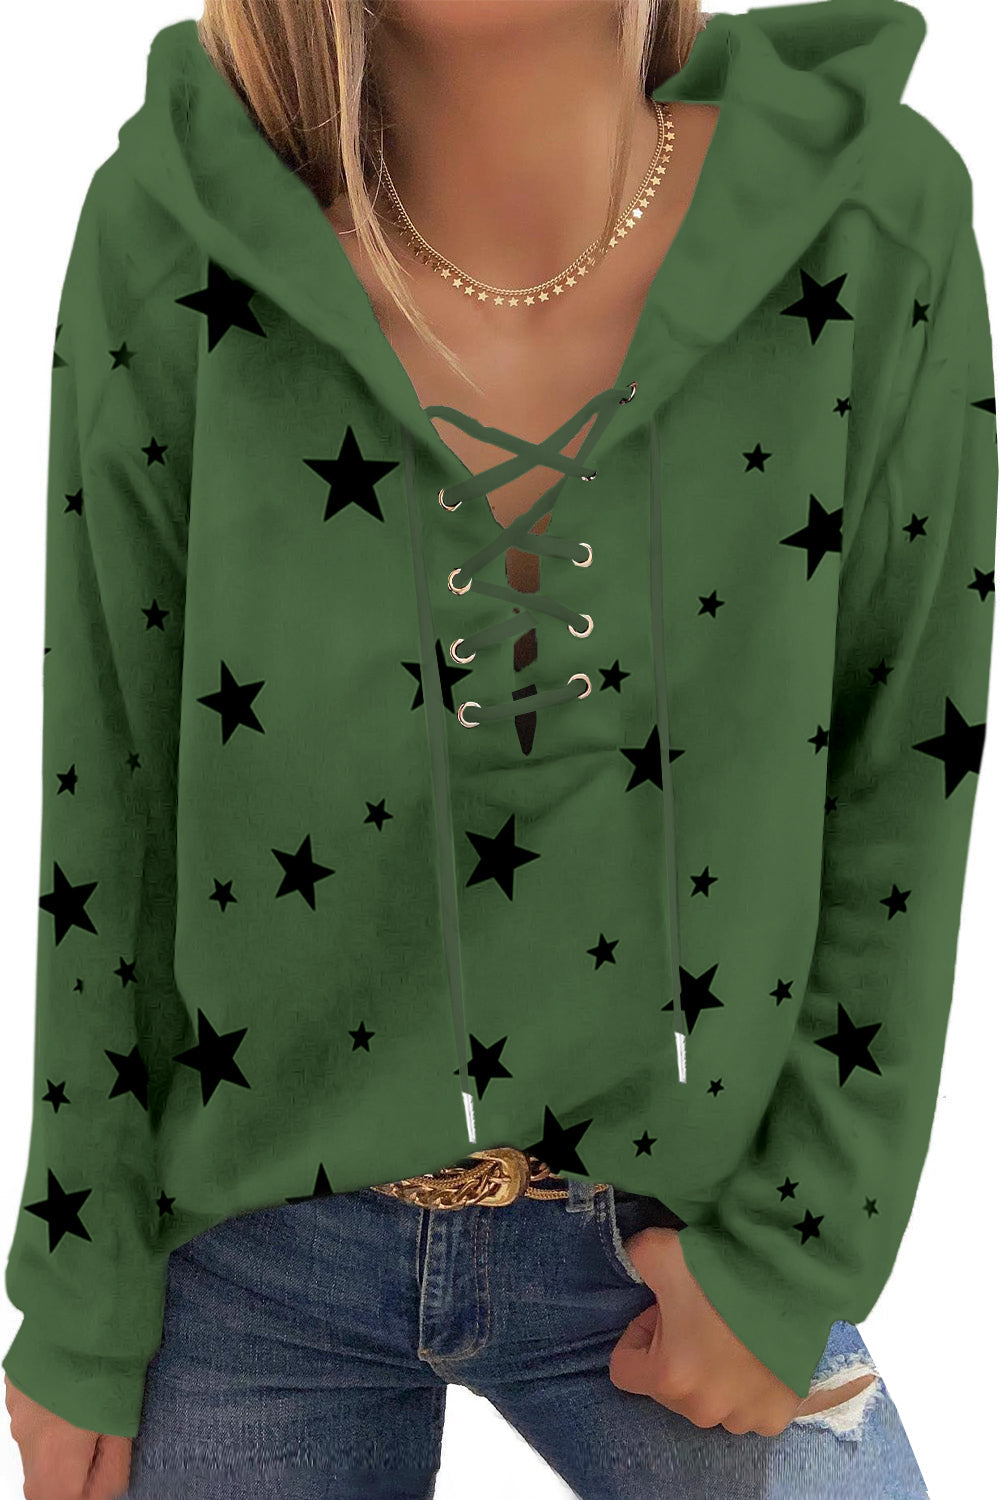 Star Pattern Lace-Up Hoodie - Women’s Clothing & Accessories - Shirts & Tops - 4 - 2024